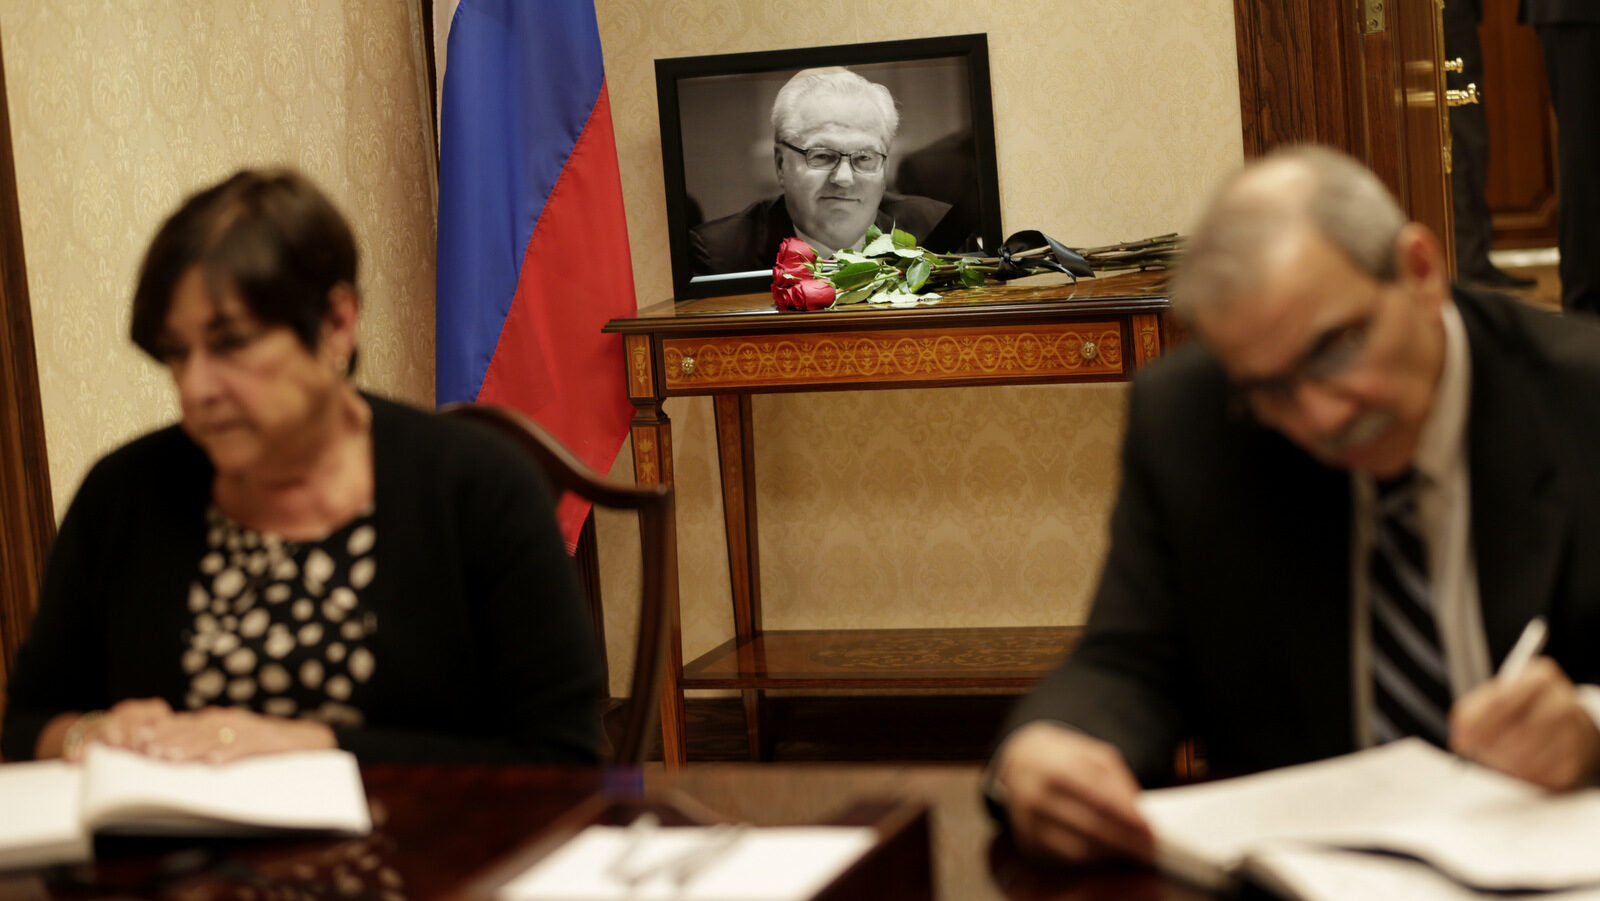 A picture of Vitaly Churkin, Russia's ambassador to the United Nations, is displayed while people sign condolences books at the Russian Mission to the U.N. in New York, Tuesday, Feb. 21, 2017. The city medical examiner was expected to perform an autopsy Tuesday on Russia's ambassador to the U.N., who died a day earlier after falling ill at his office at Russia's U.N. mission. (AP/Seth Wenig)